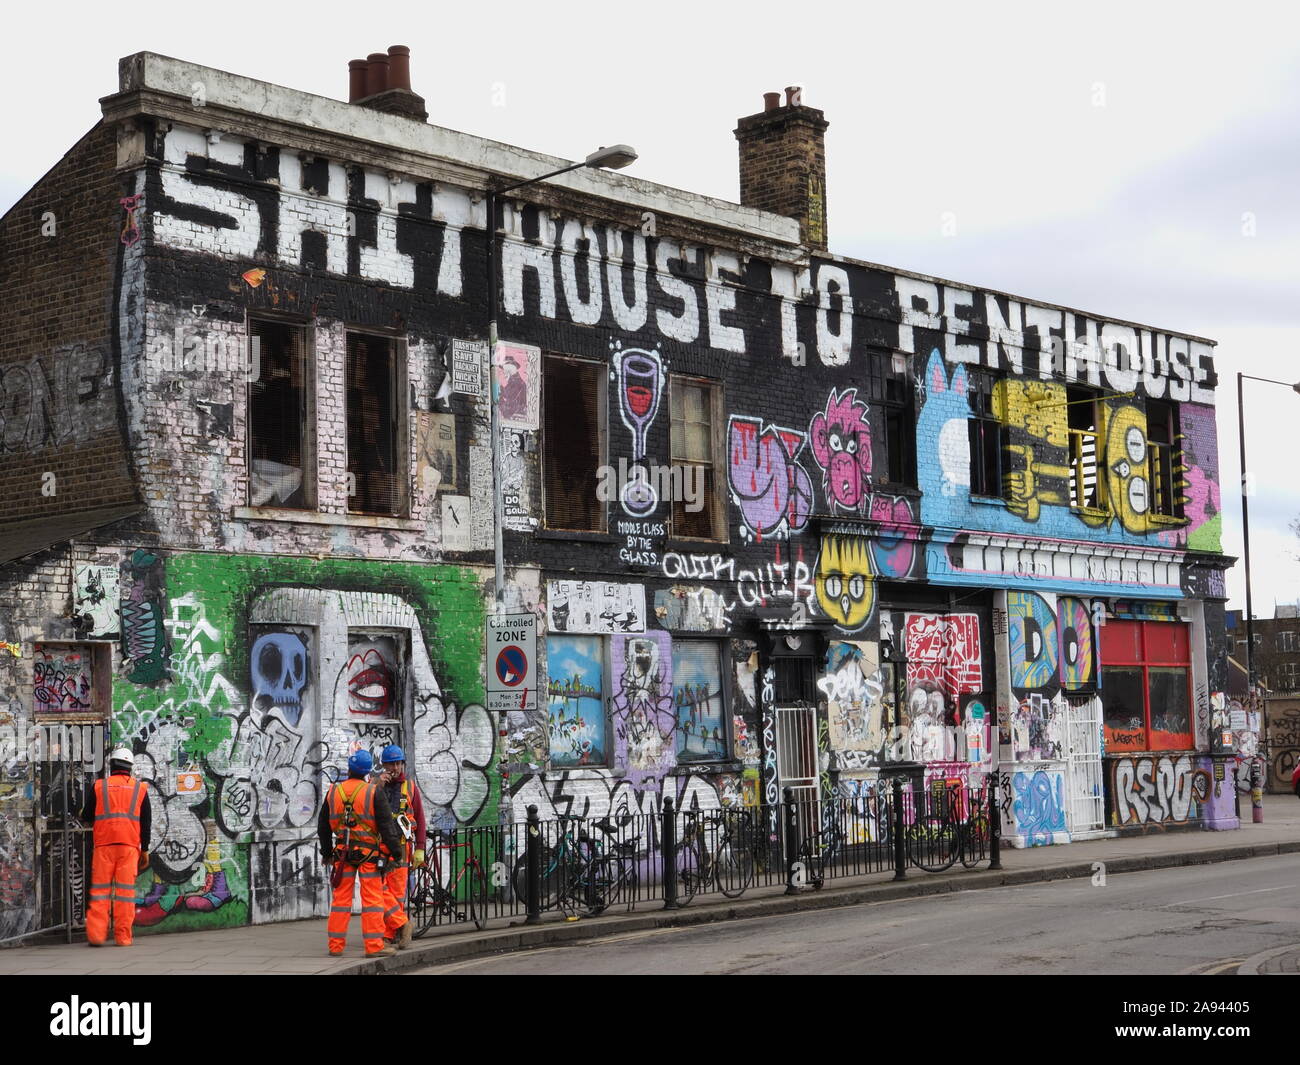 Builders in front of a decrepit building occupied by squatters and covered in graffiti protesting against gentrification. Hackney Wick, East London. Stock Photo